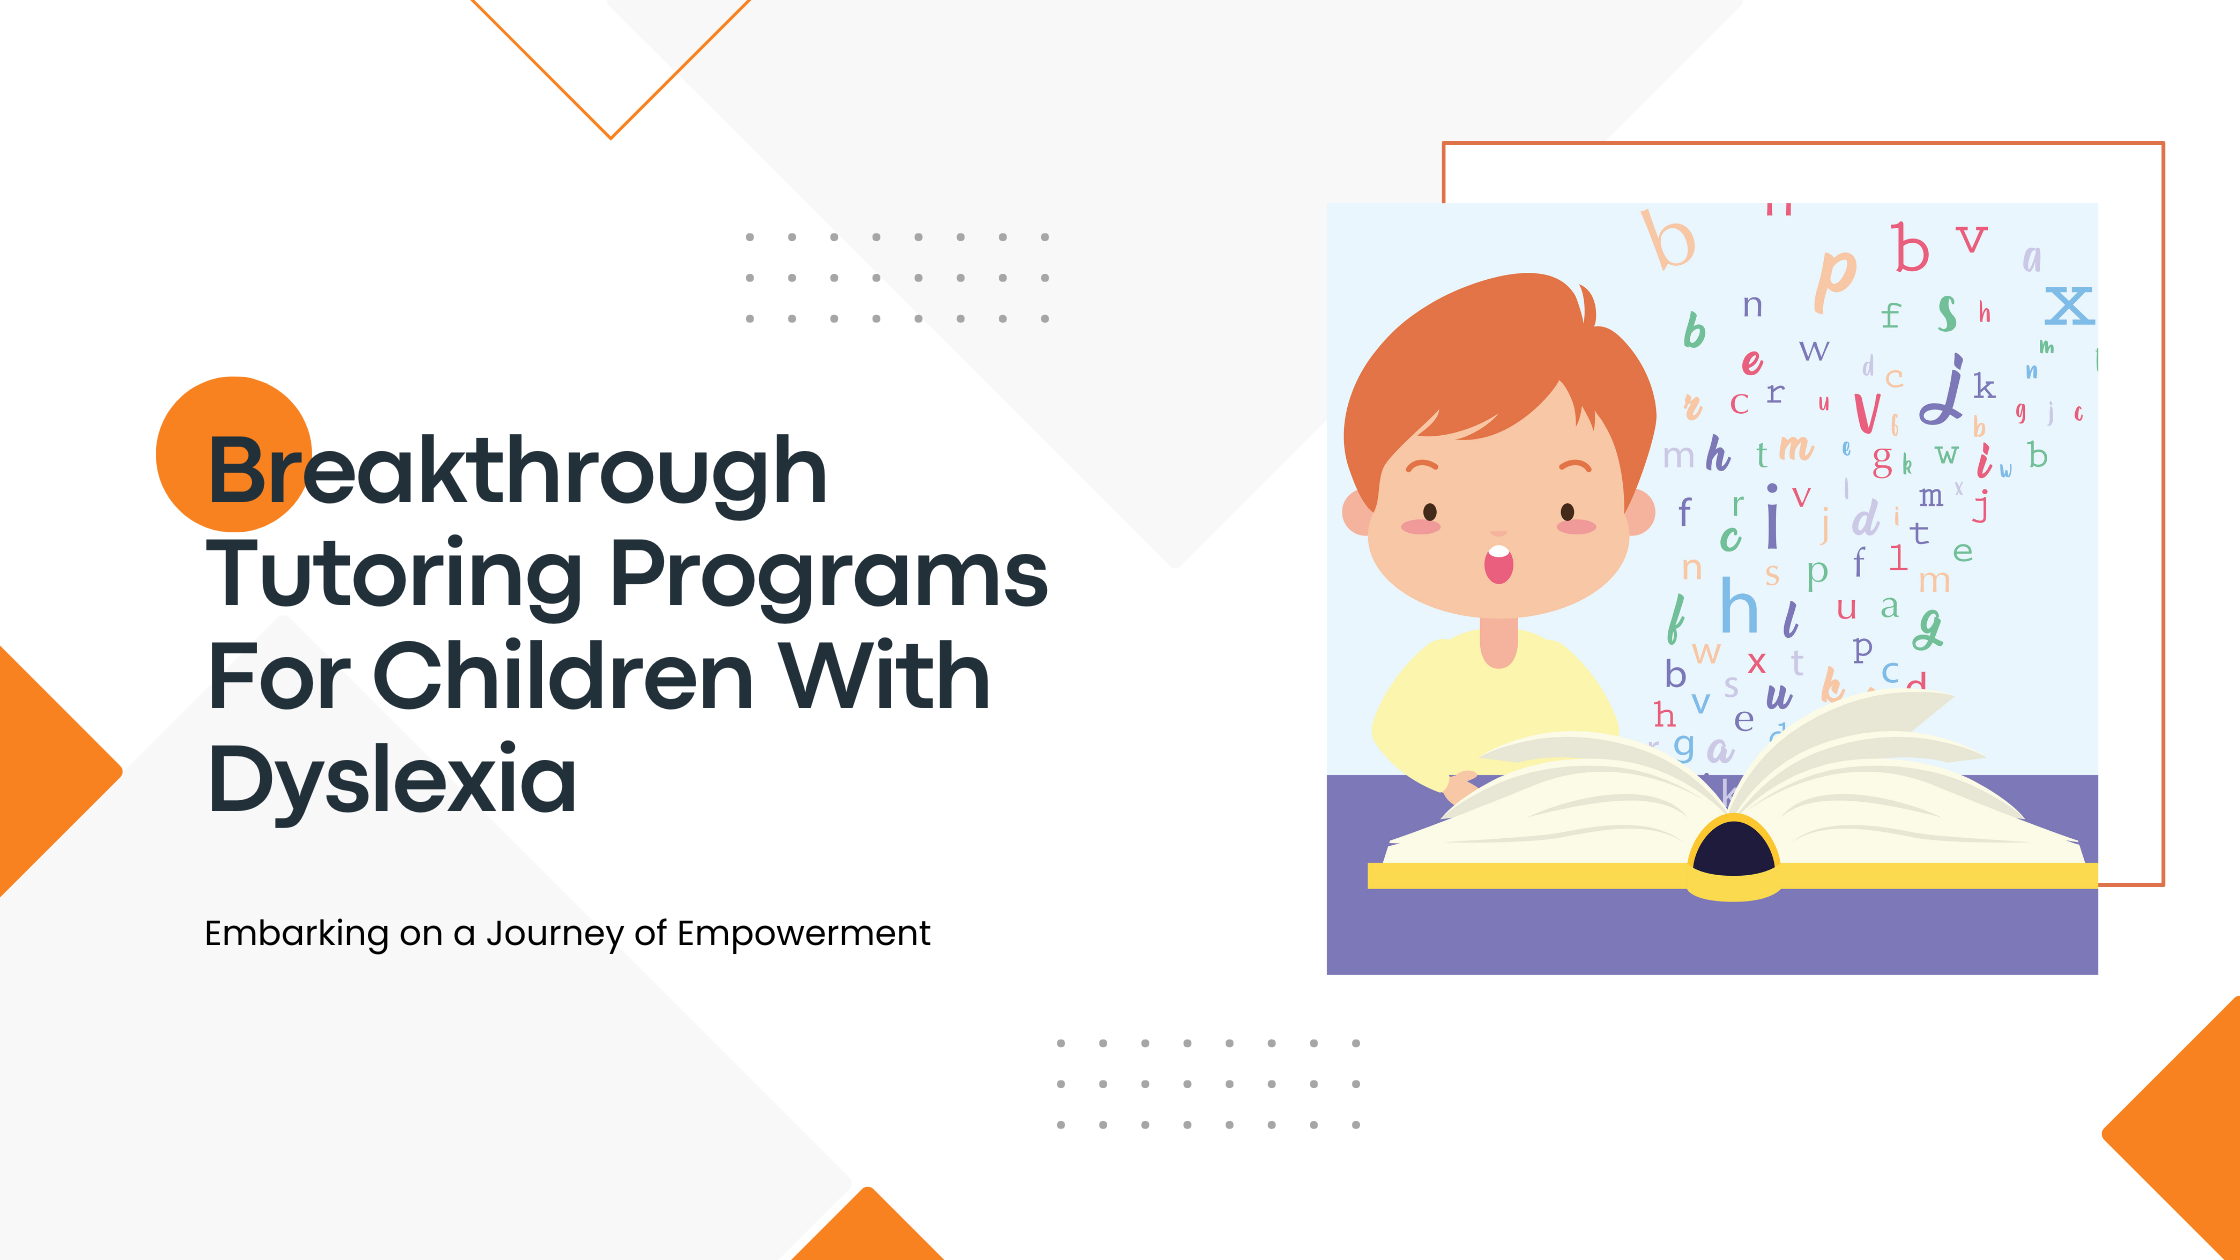 Breakthrough Tutoring Programs for Children With Dyslexia: Embarking on a Journey of Empowerment